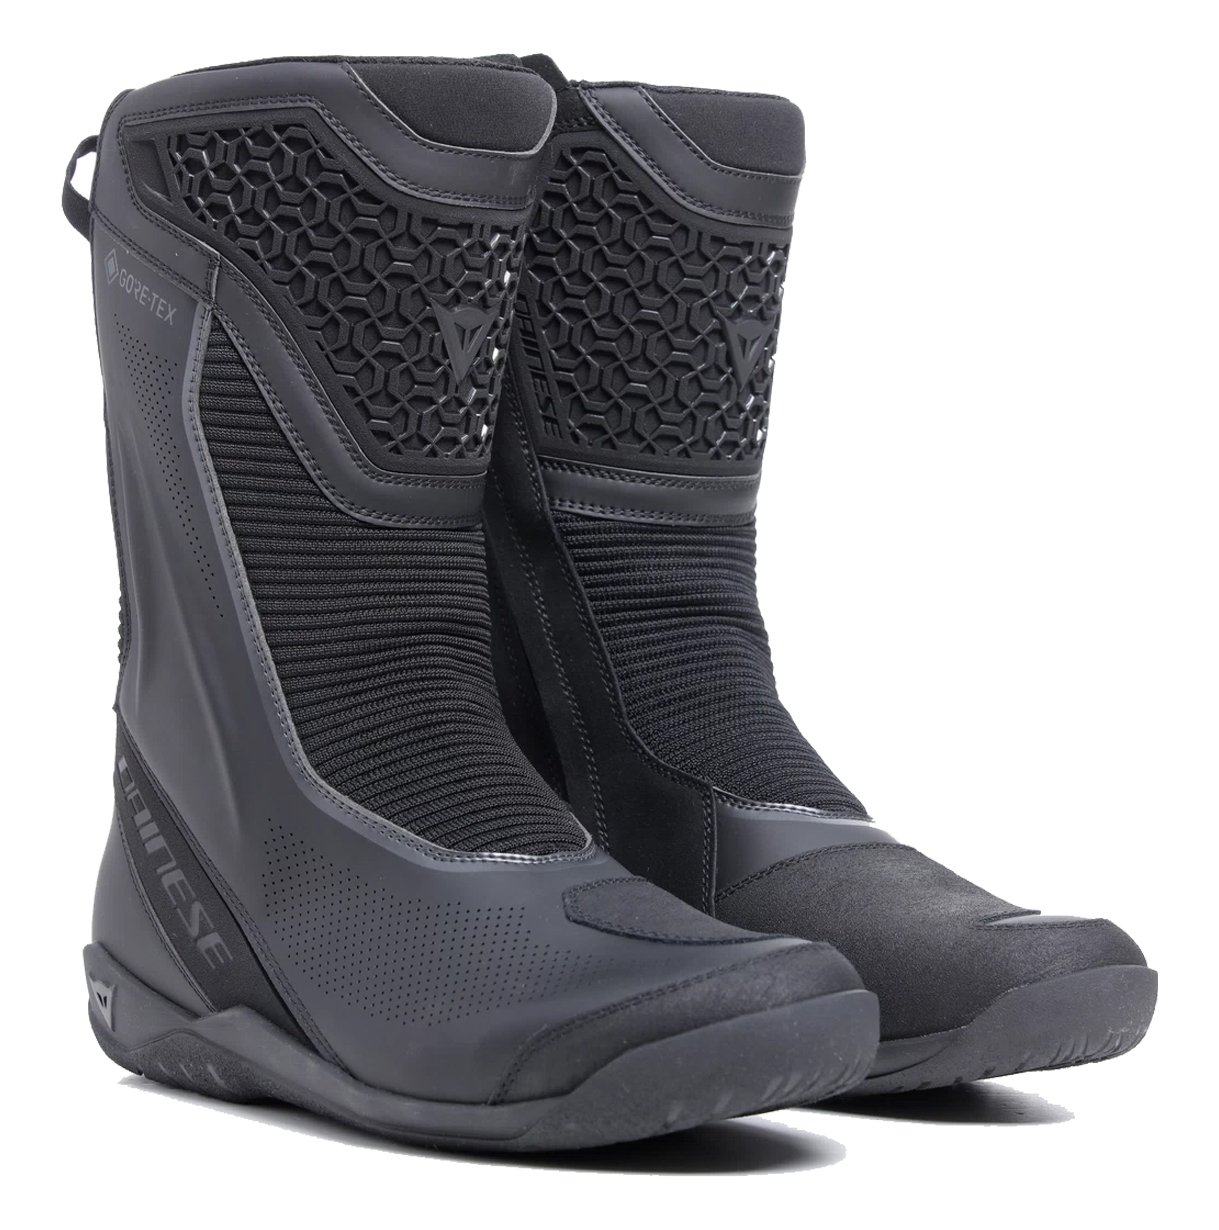 Image of Dainese Freeland 2 Gore-Tex Boots Black Talla 39